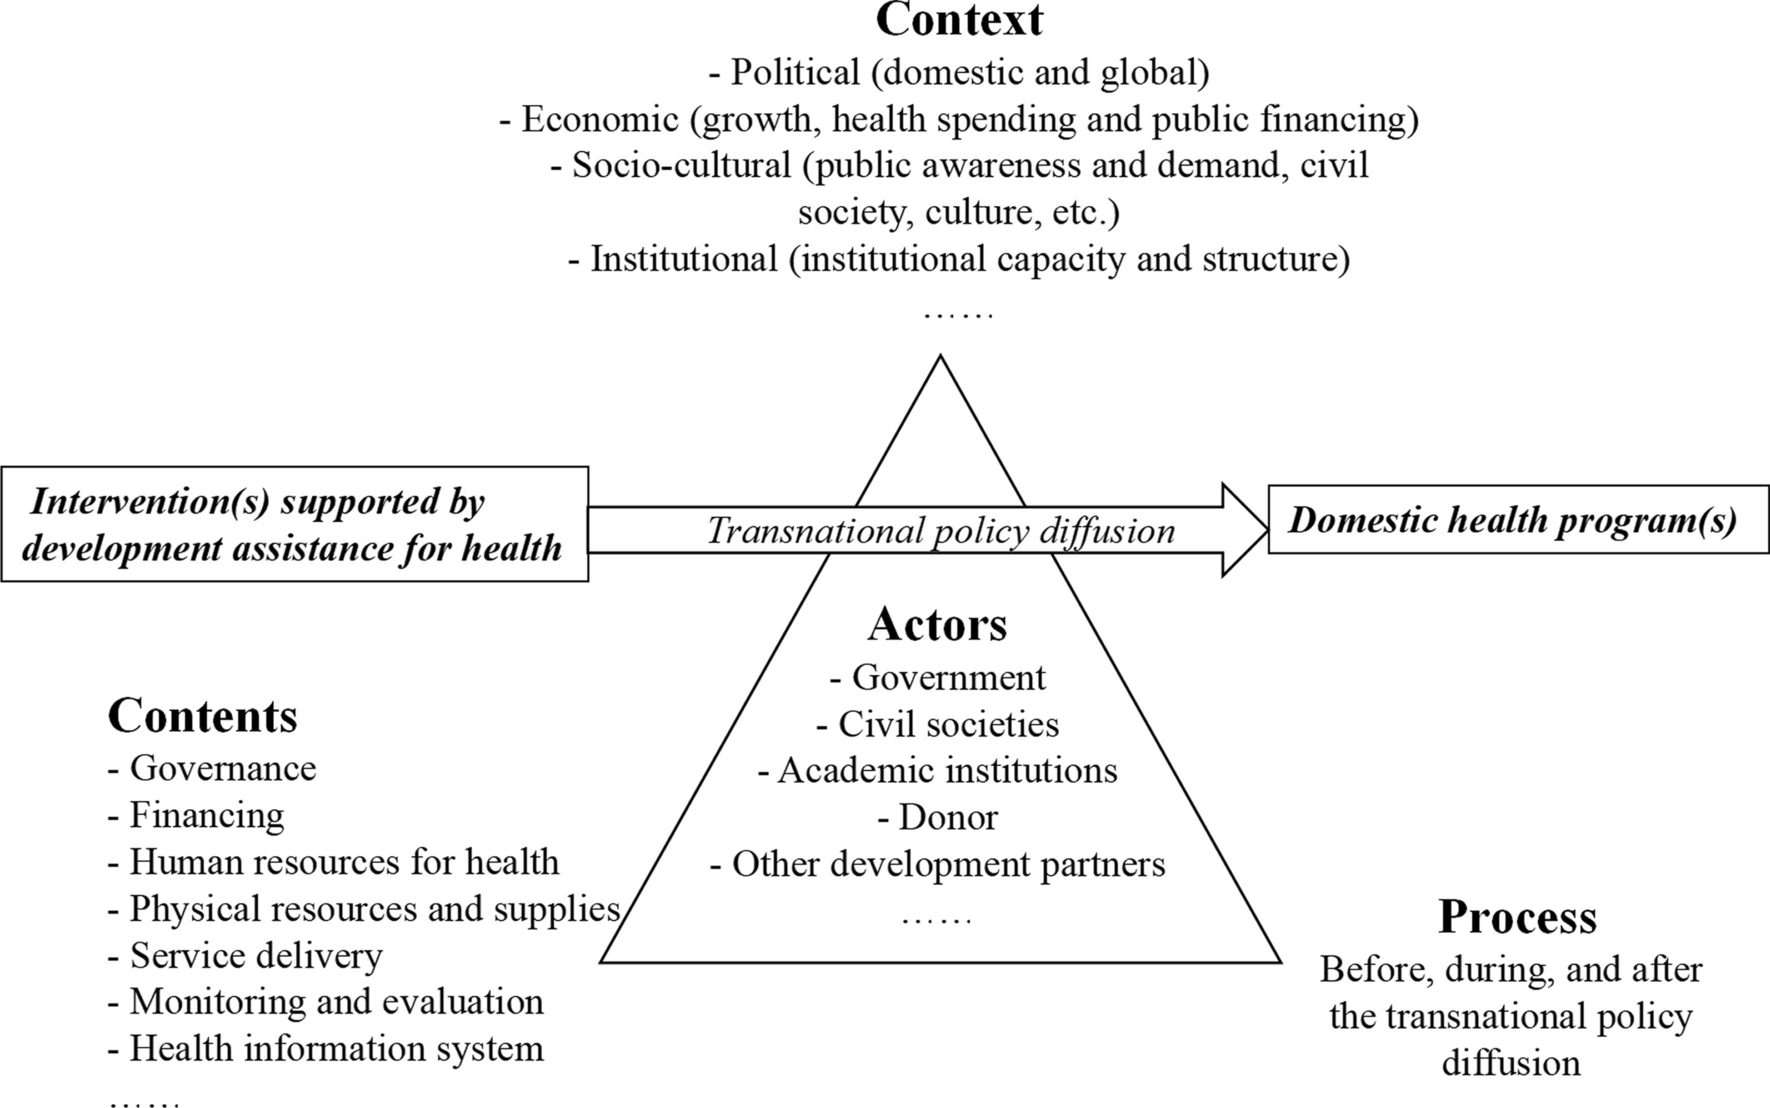 Development assistance, donor–recipient dynamic, and domestic policy: a case study of two health interventions supported by World Bank–UK and Global Fund in China